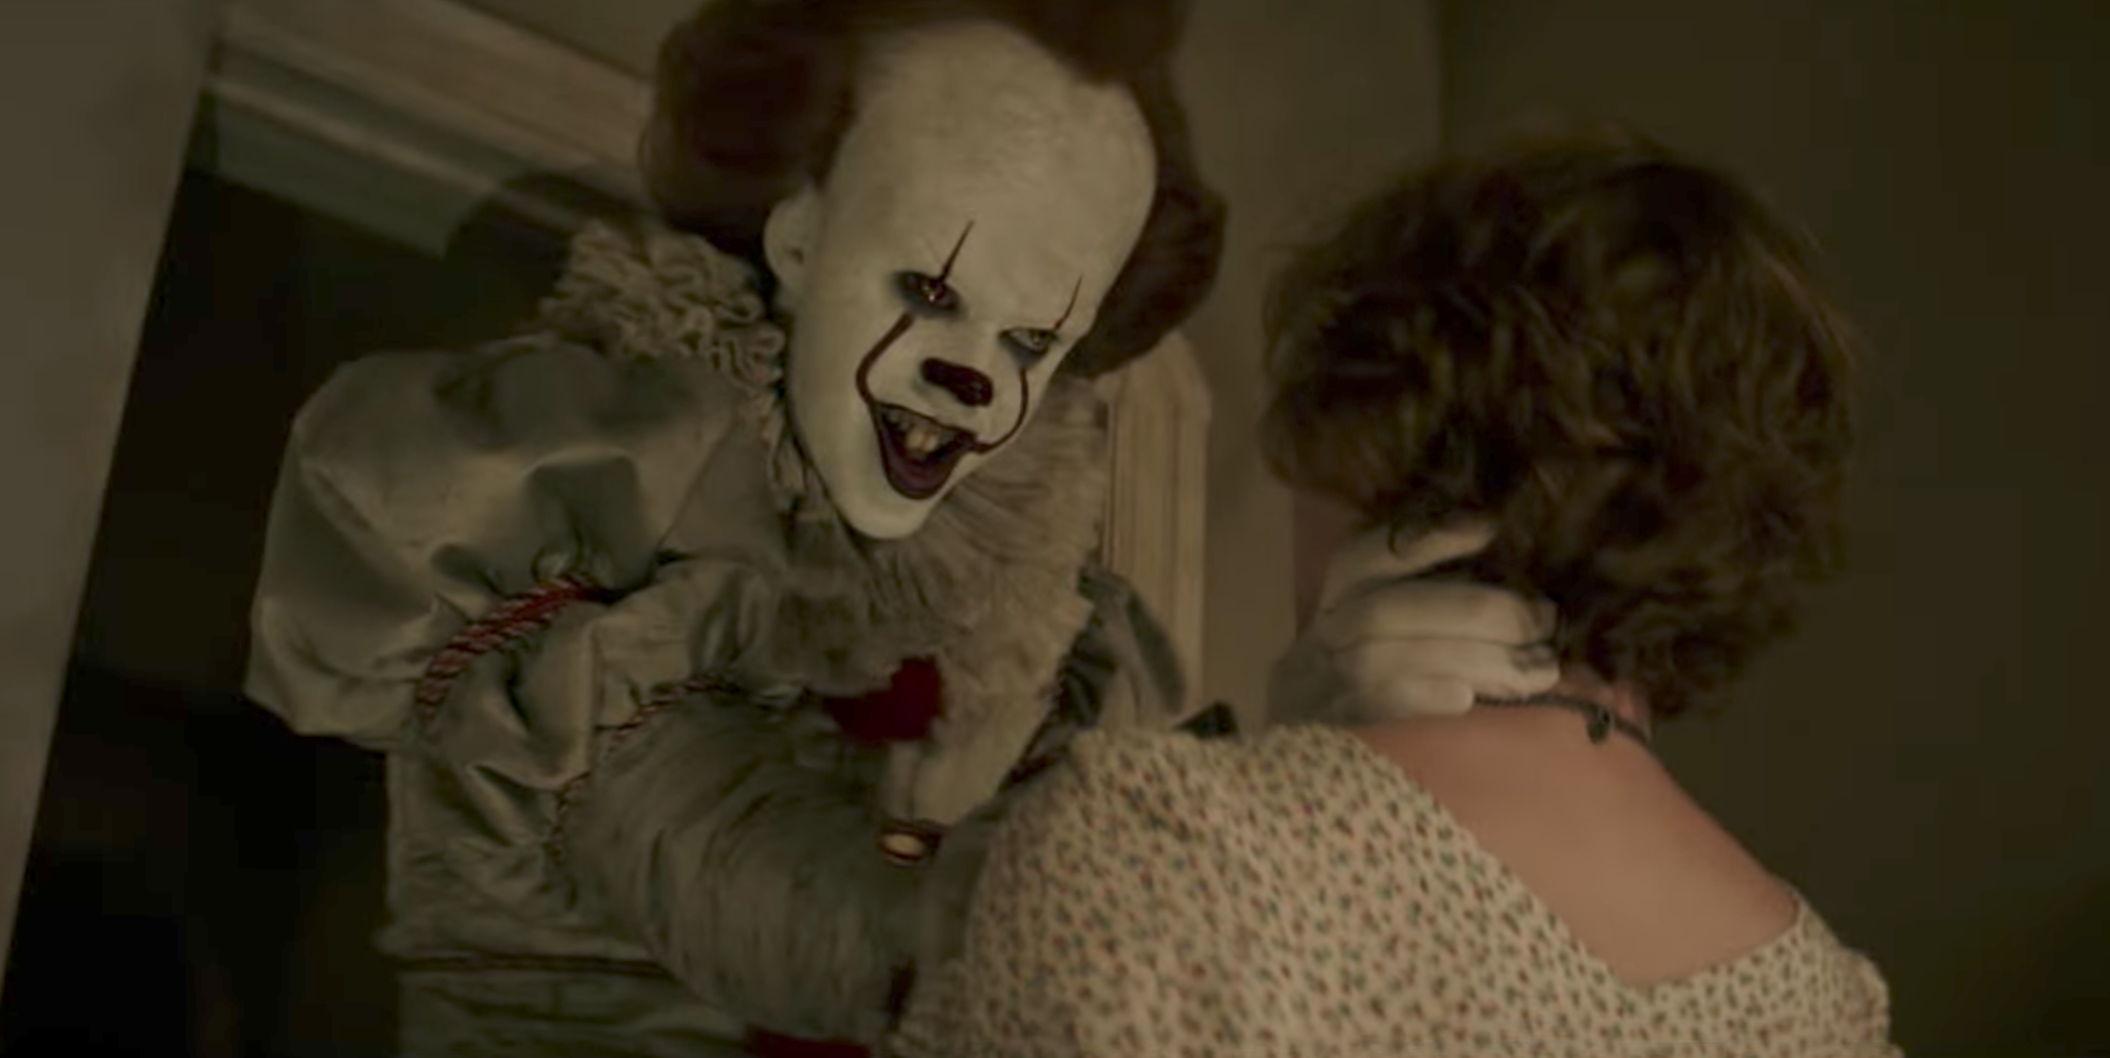 You are reading: 5 Life Lessons and Moral Value from Pennywise the Dancing Clown in Stephen King's It 2017 Movie